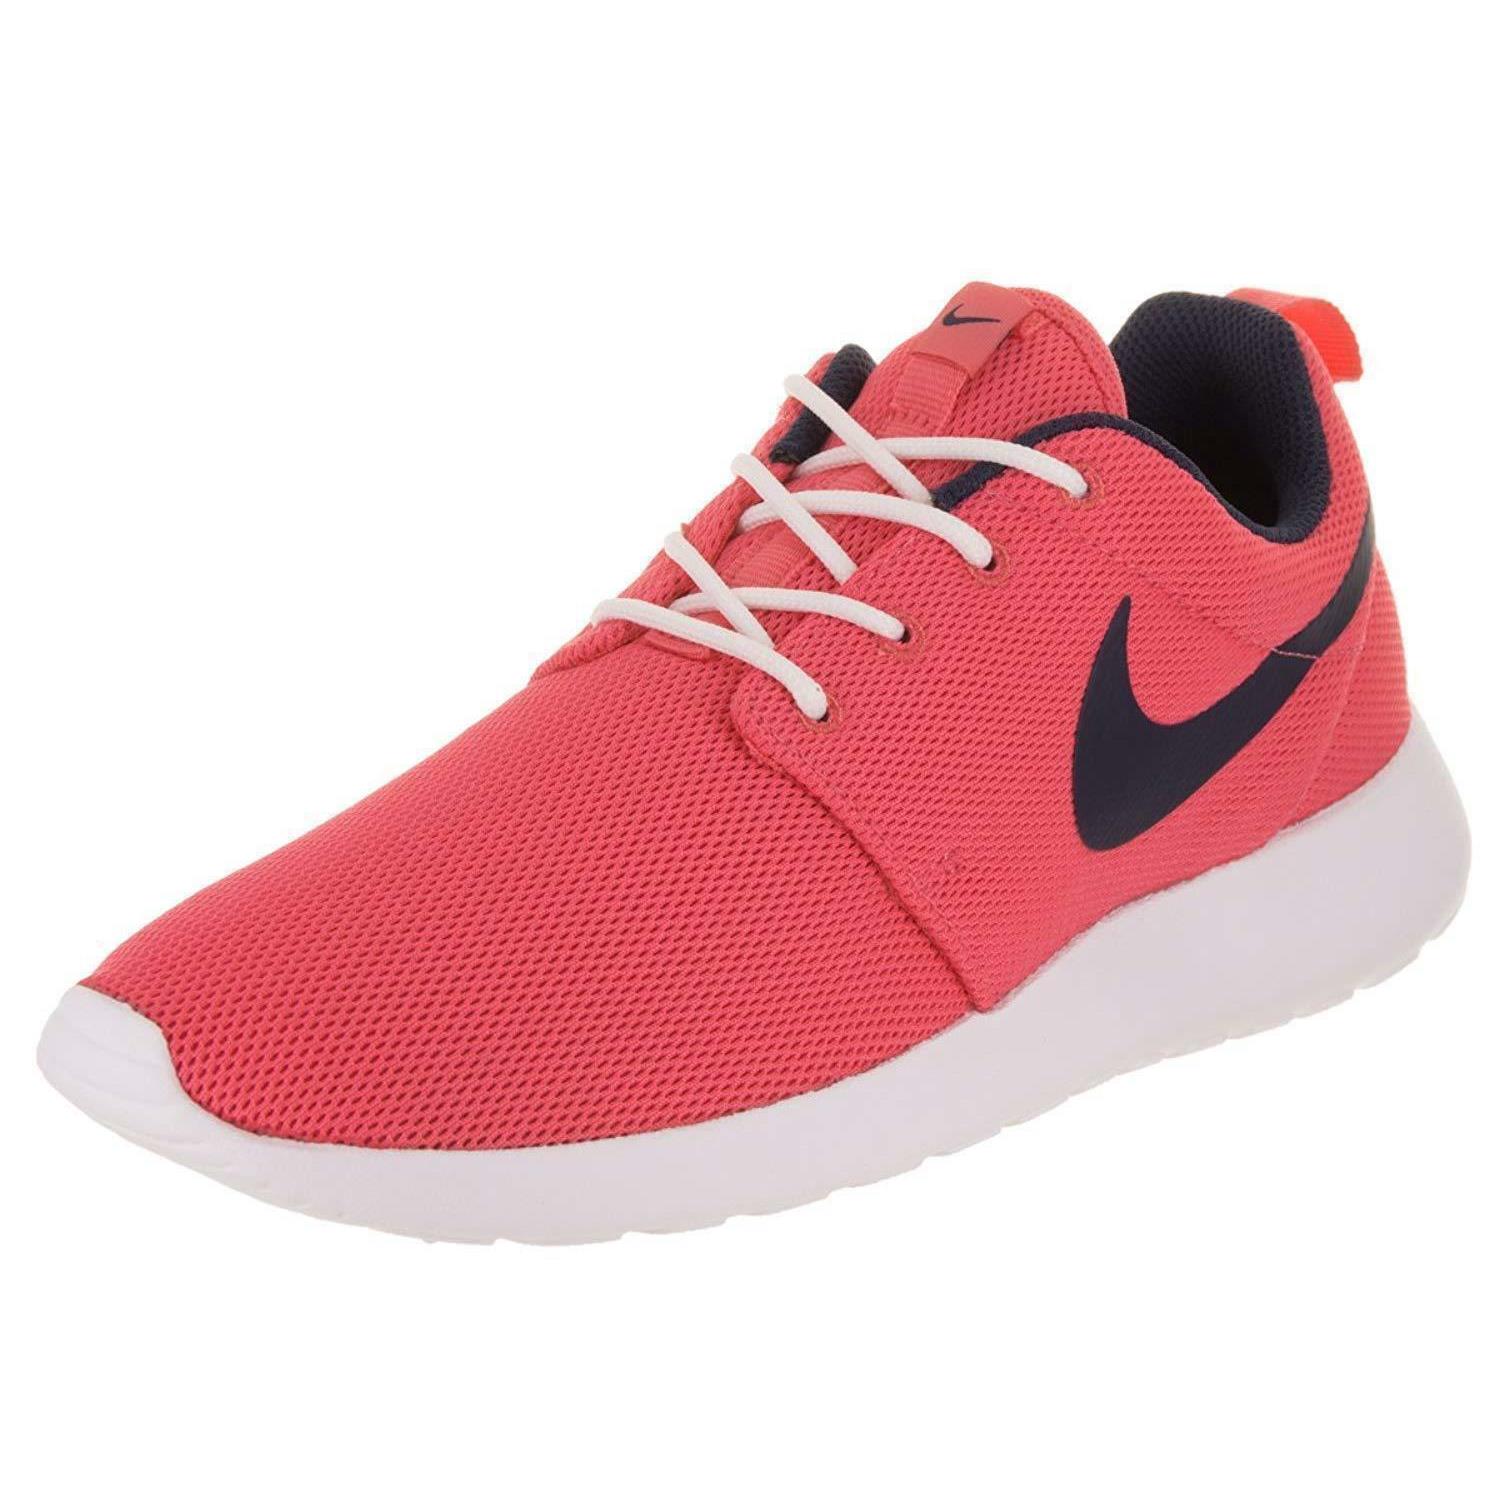 Nike Roshe One Sea Coral 844994-801 Women`s Sea Coral/white Shoes Size 8.5 WR149